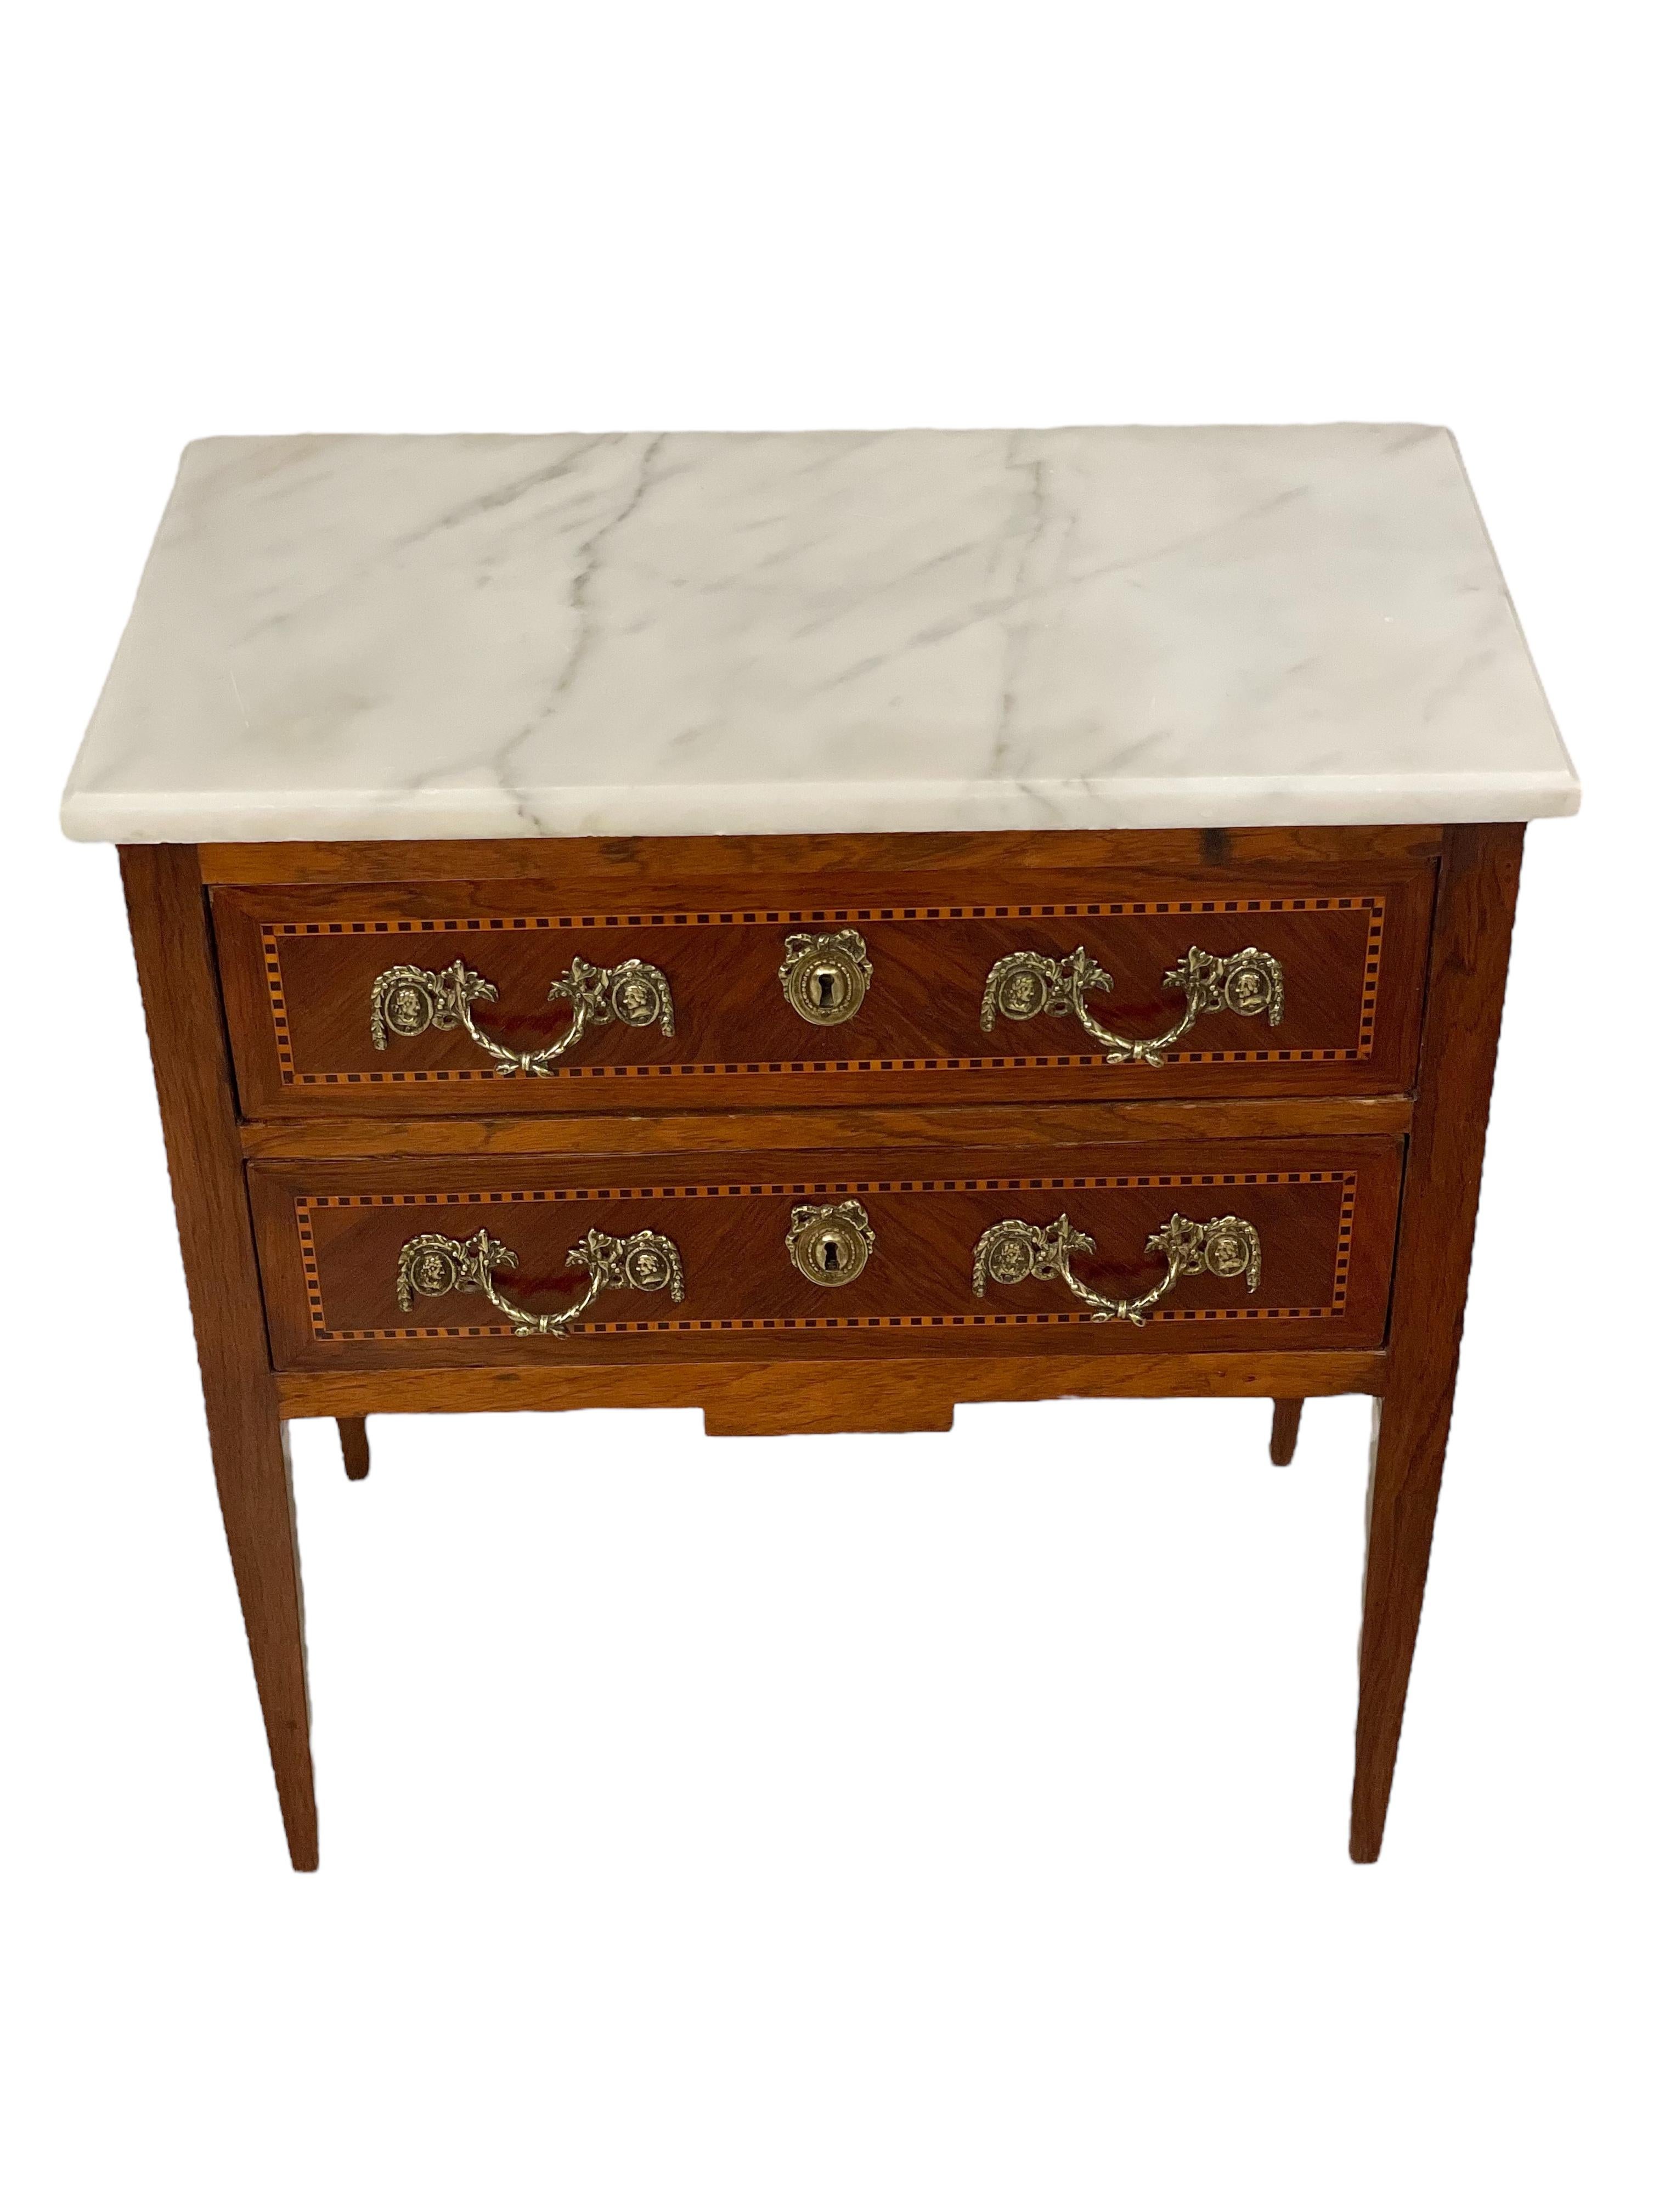 19th Century Louis XVI Marquetry Commode with Marble Top For Sale 10